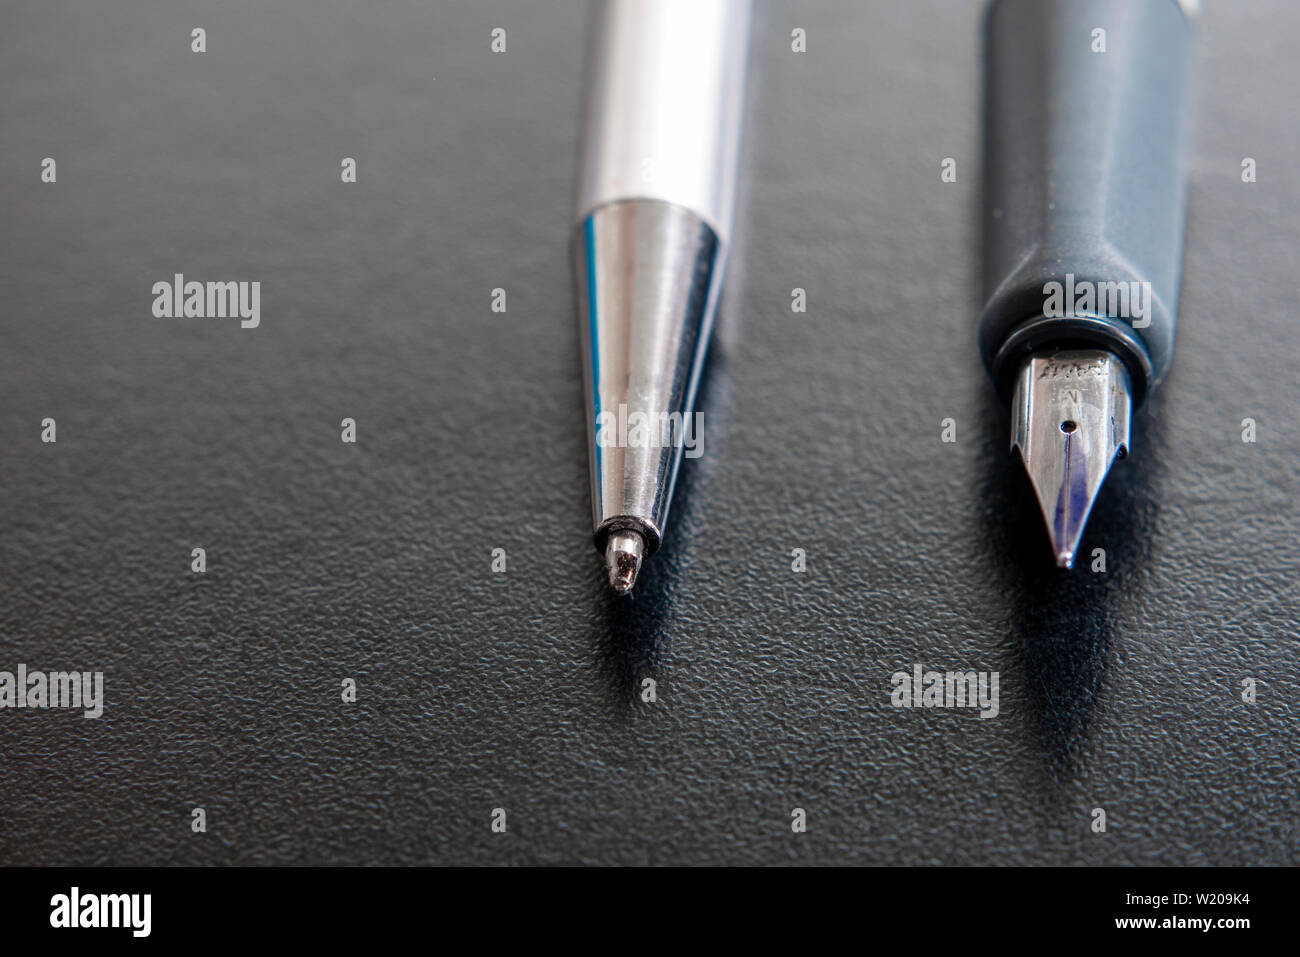 Fountain pen and a ballpoint pen. Illustration to represent the situation of the office and desk work. Stock Photo